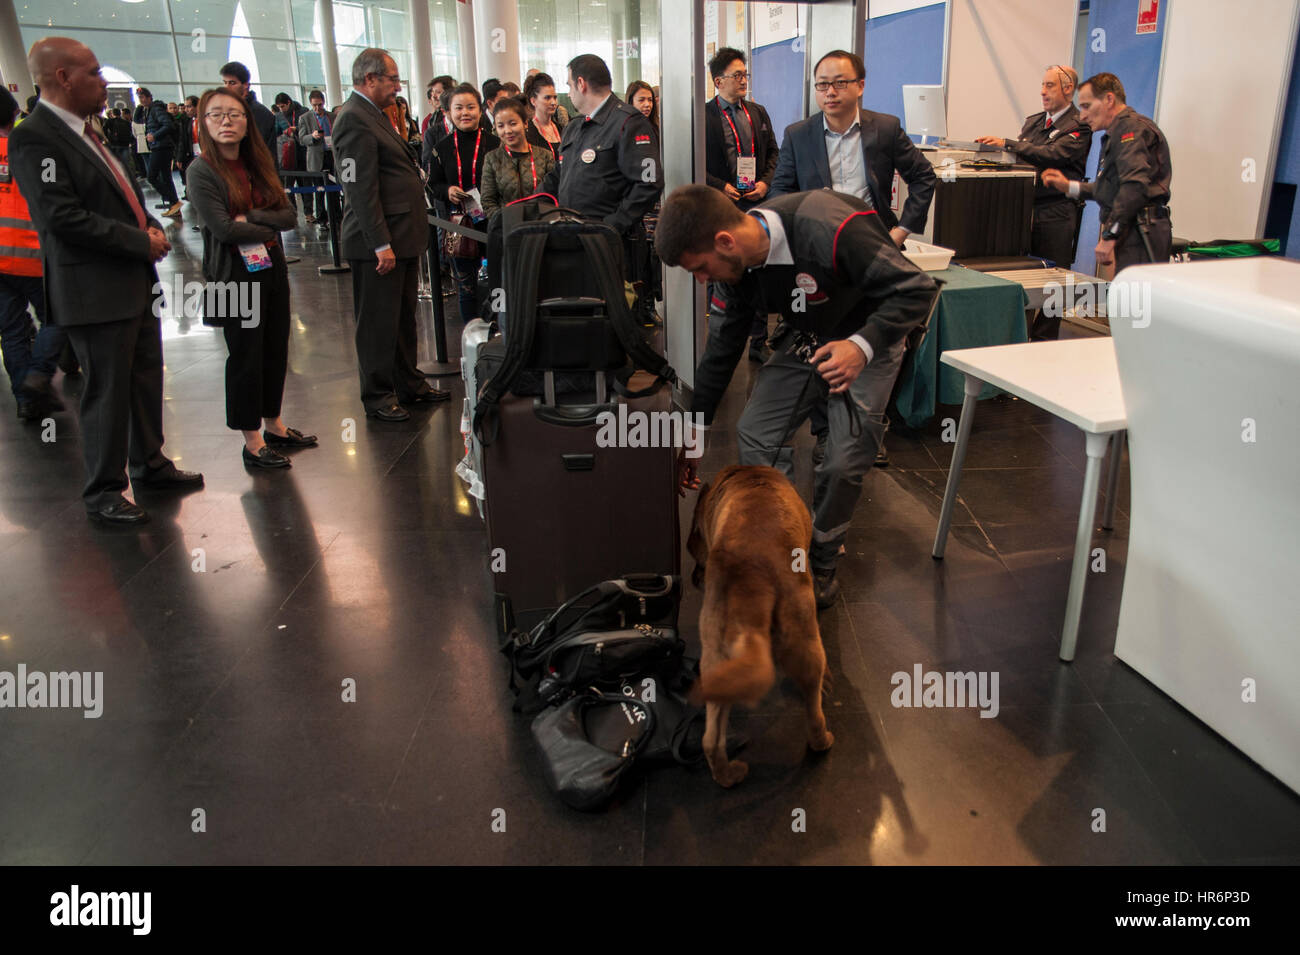 Barcelona, Spain. 27th Feb, 2017. Visitors wait to enter to the Mobile World Congress while a security guard checks with a police dog all the bundles that enter the interior. Credit: Charlie Perez/Alamy Live News Stock Photo